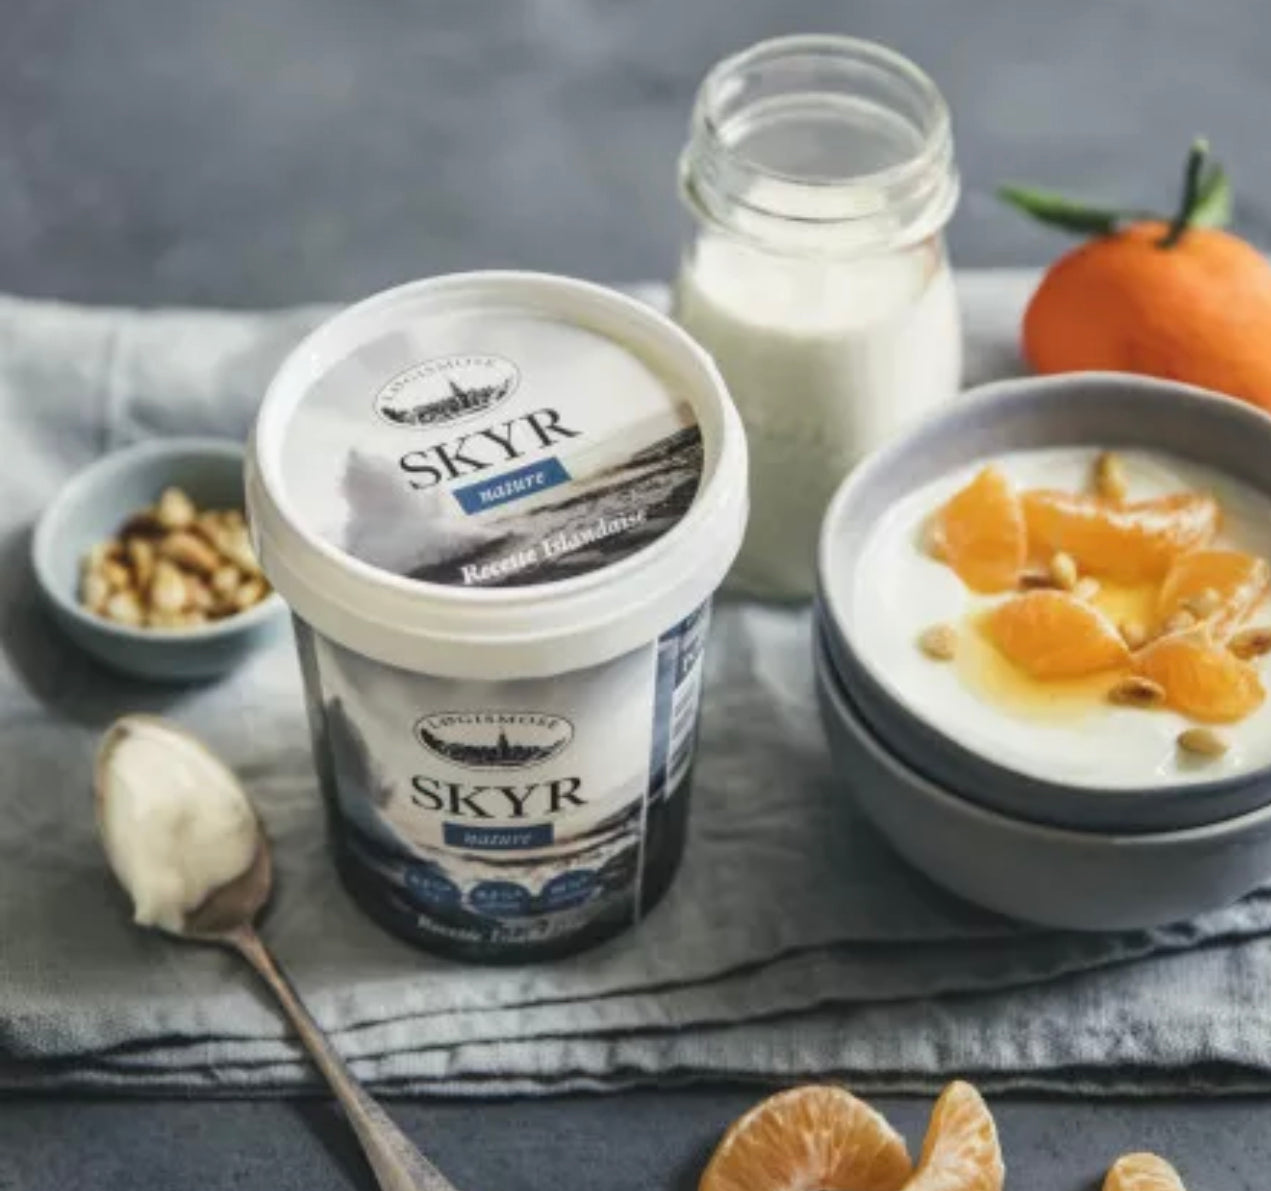 Skyr nature | Concentrated fermented milk 0.2% fat - 450g